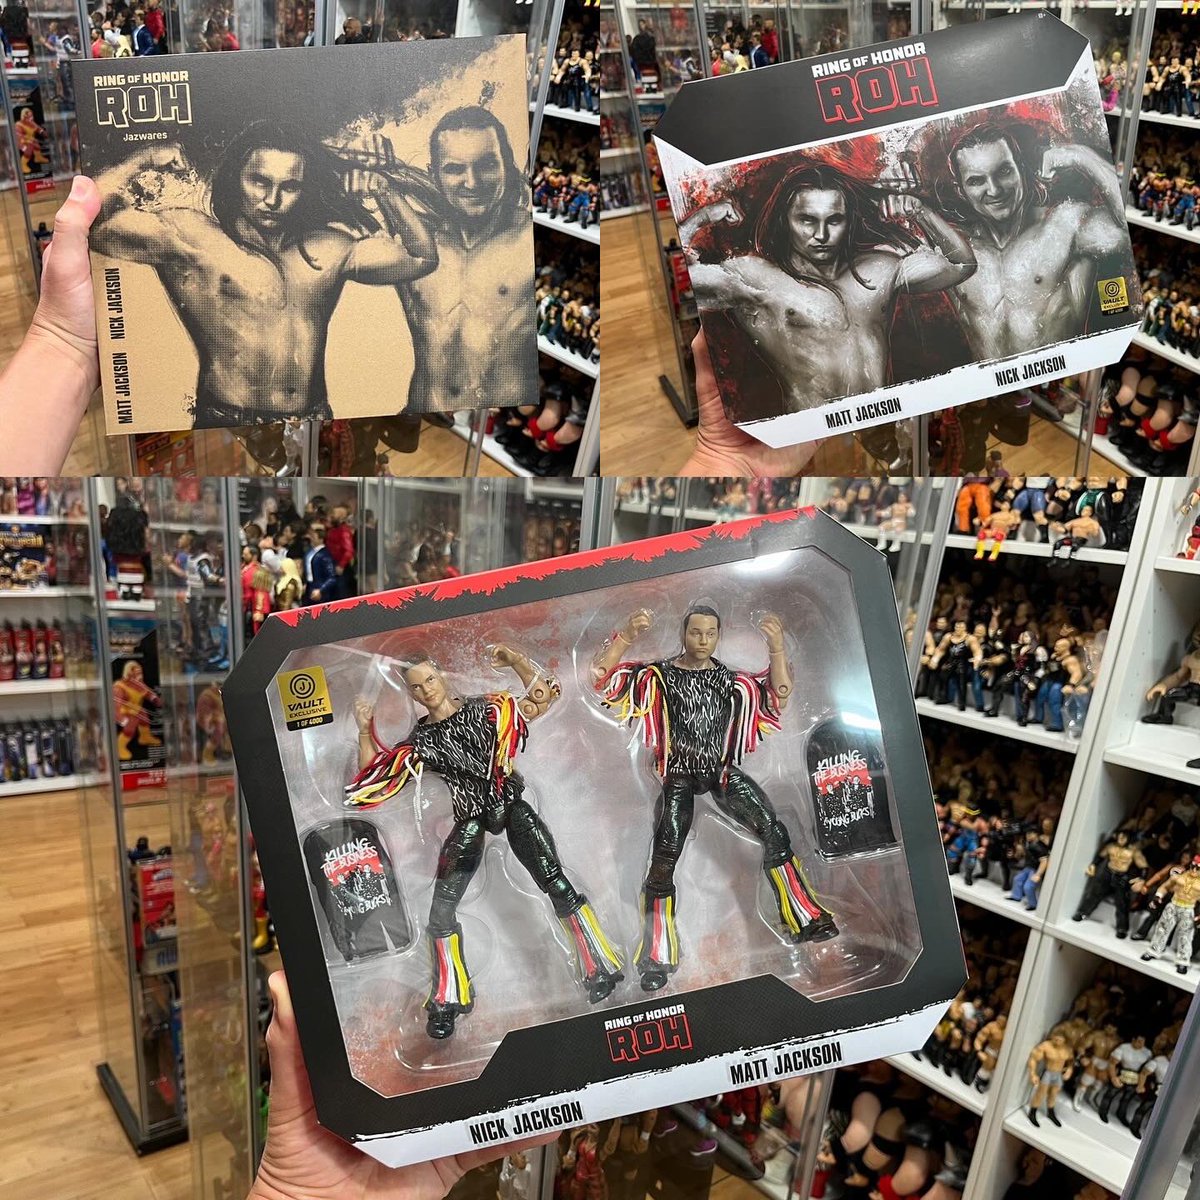 Even though I’m not crazy about the heads on these Bucks figures, I do love the presentation of the @jazwaresvault Ring of Honor series. I think that alone is enough to convince me to be a completist on these! Follow @figheel & @casefreshpod on social media for action figure…